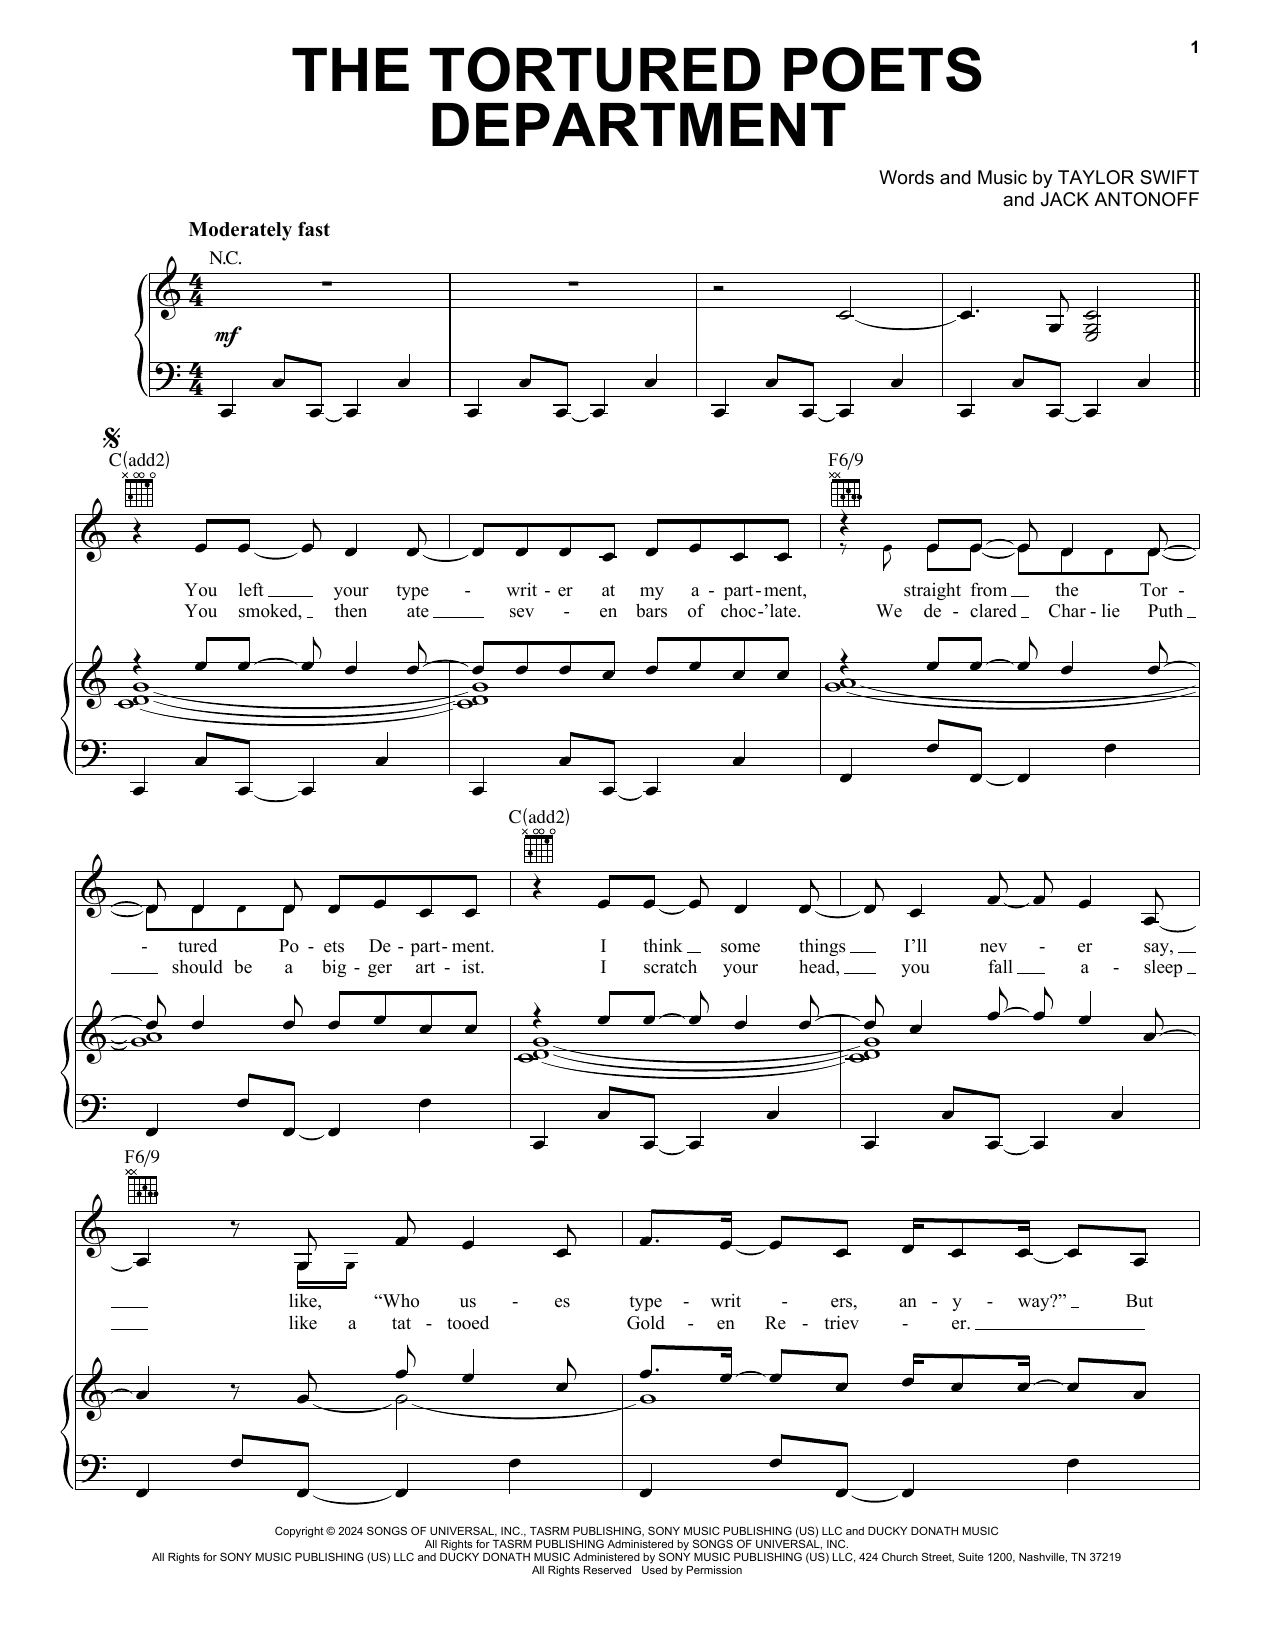 Taylor Swift 'The Tortured Poets Department' Sheet Music for Piano